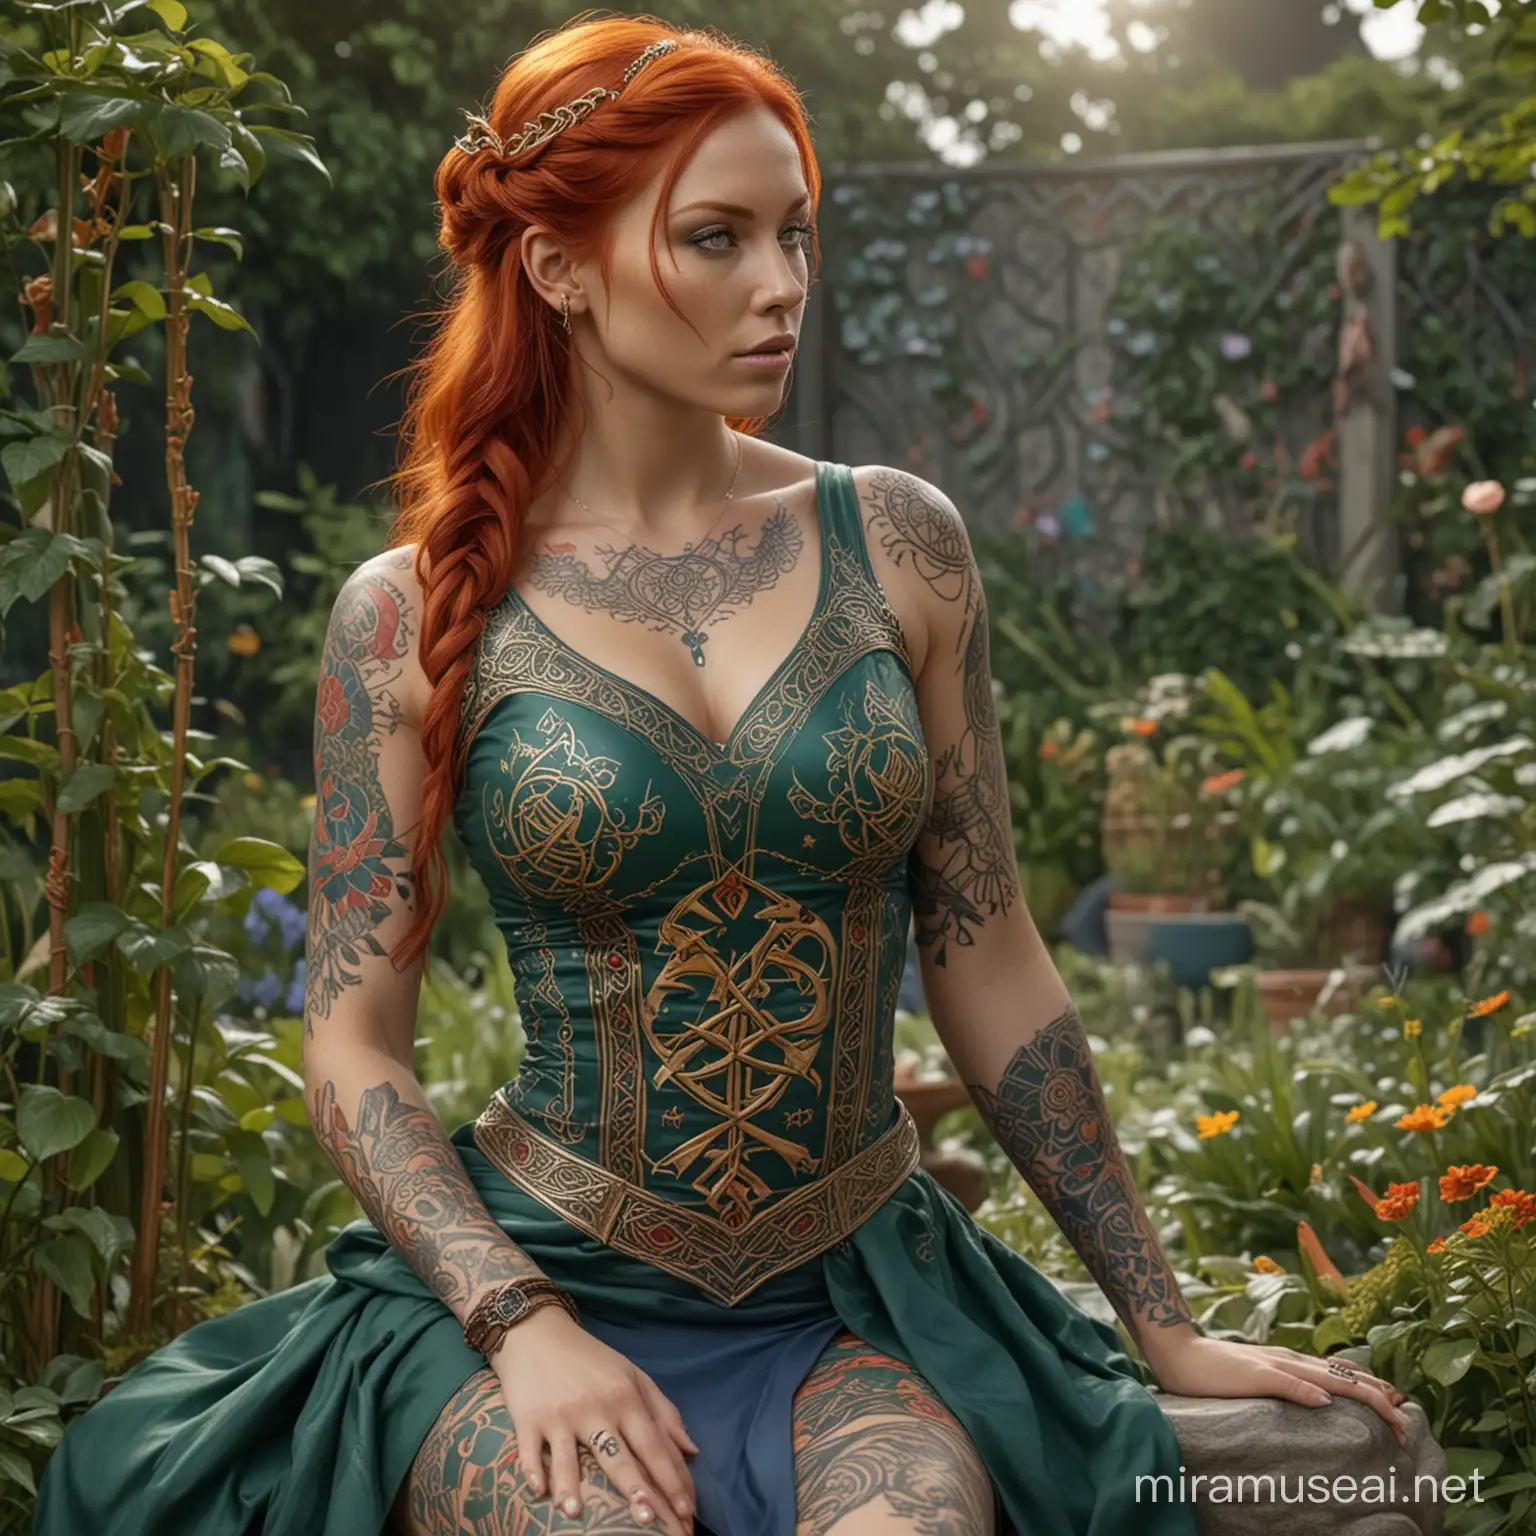 ultrarealistic high detail 4k full body long shot showing an anatomically correct female human with fiery red hair decorated with silver, colourful draconic symbols tattooed on arms, wearing a green sleeveless open front minimal top engraved with celtic runes in gold, and a blue loose skirt embodied with colourful elven symbols, sitting in a garden